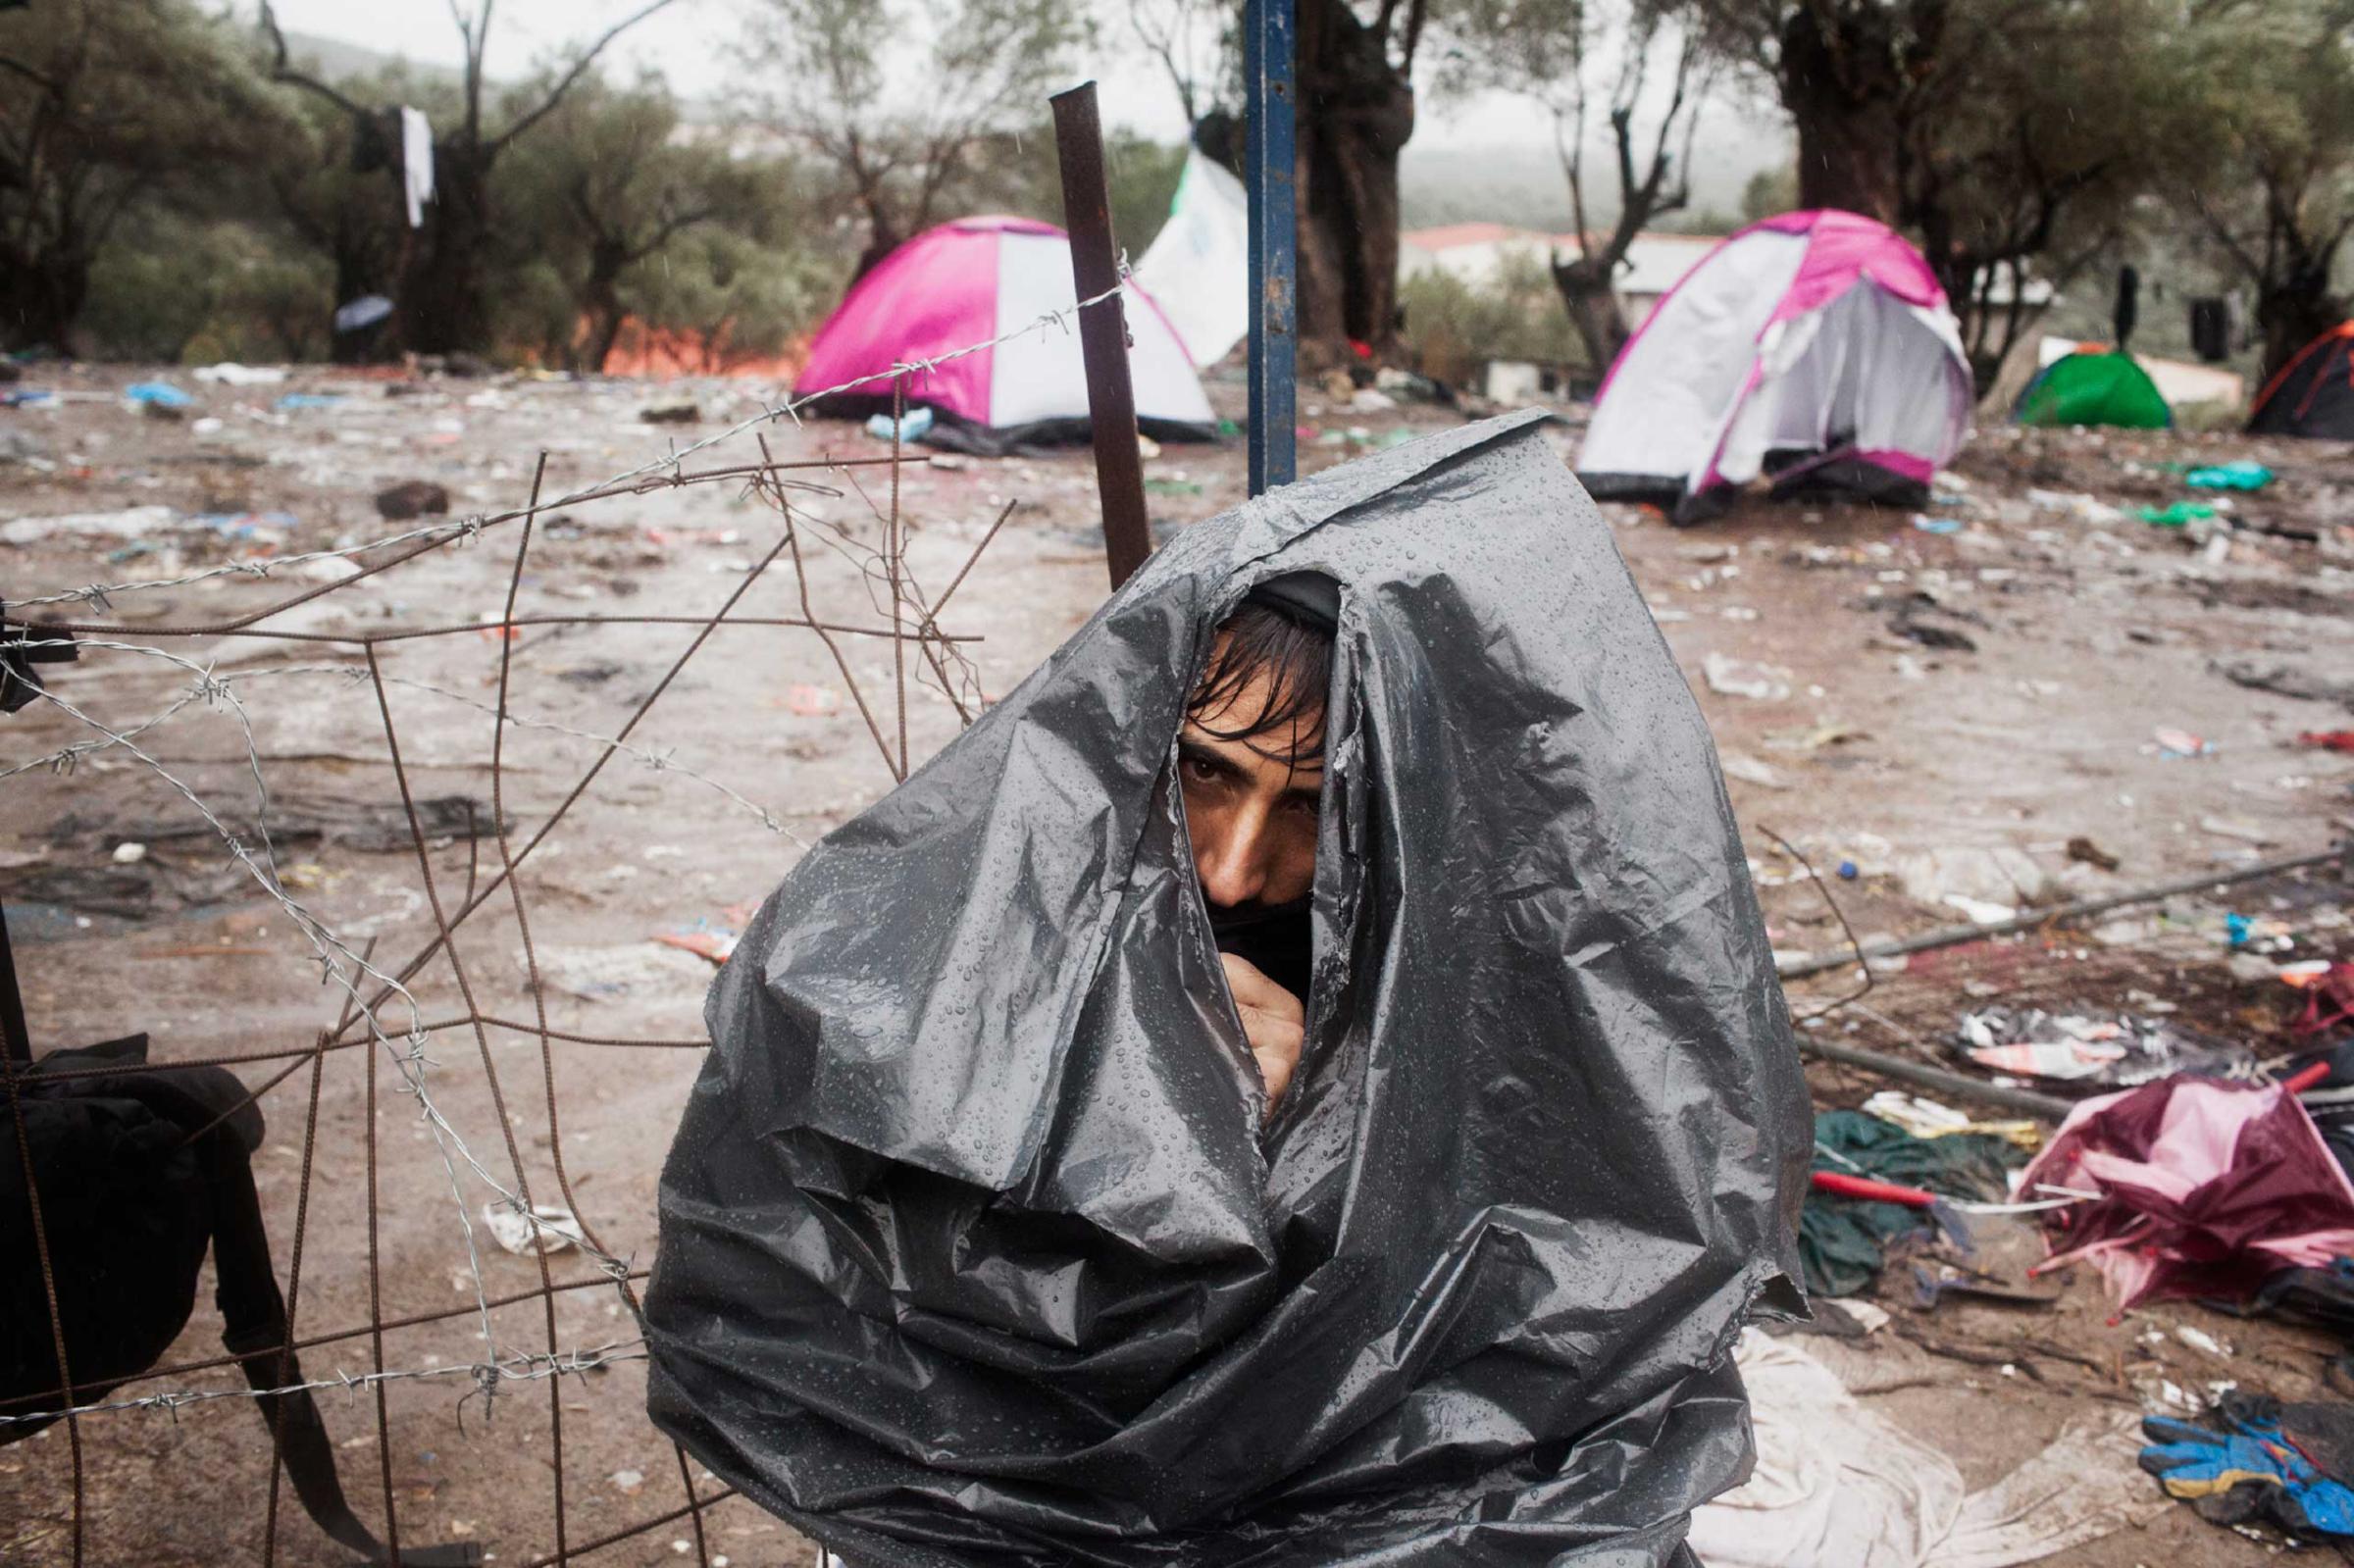 An Afghan refugee covered in a garbage bag at the Moria registration camp while he is waiting for his documents, Oct. 14, 2015.